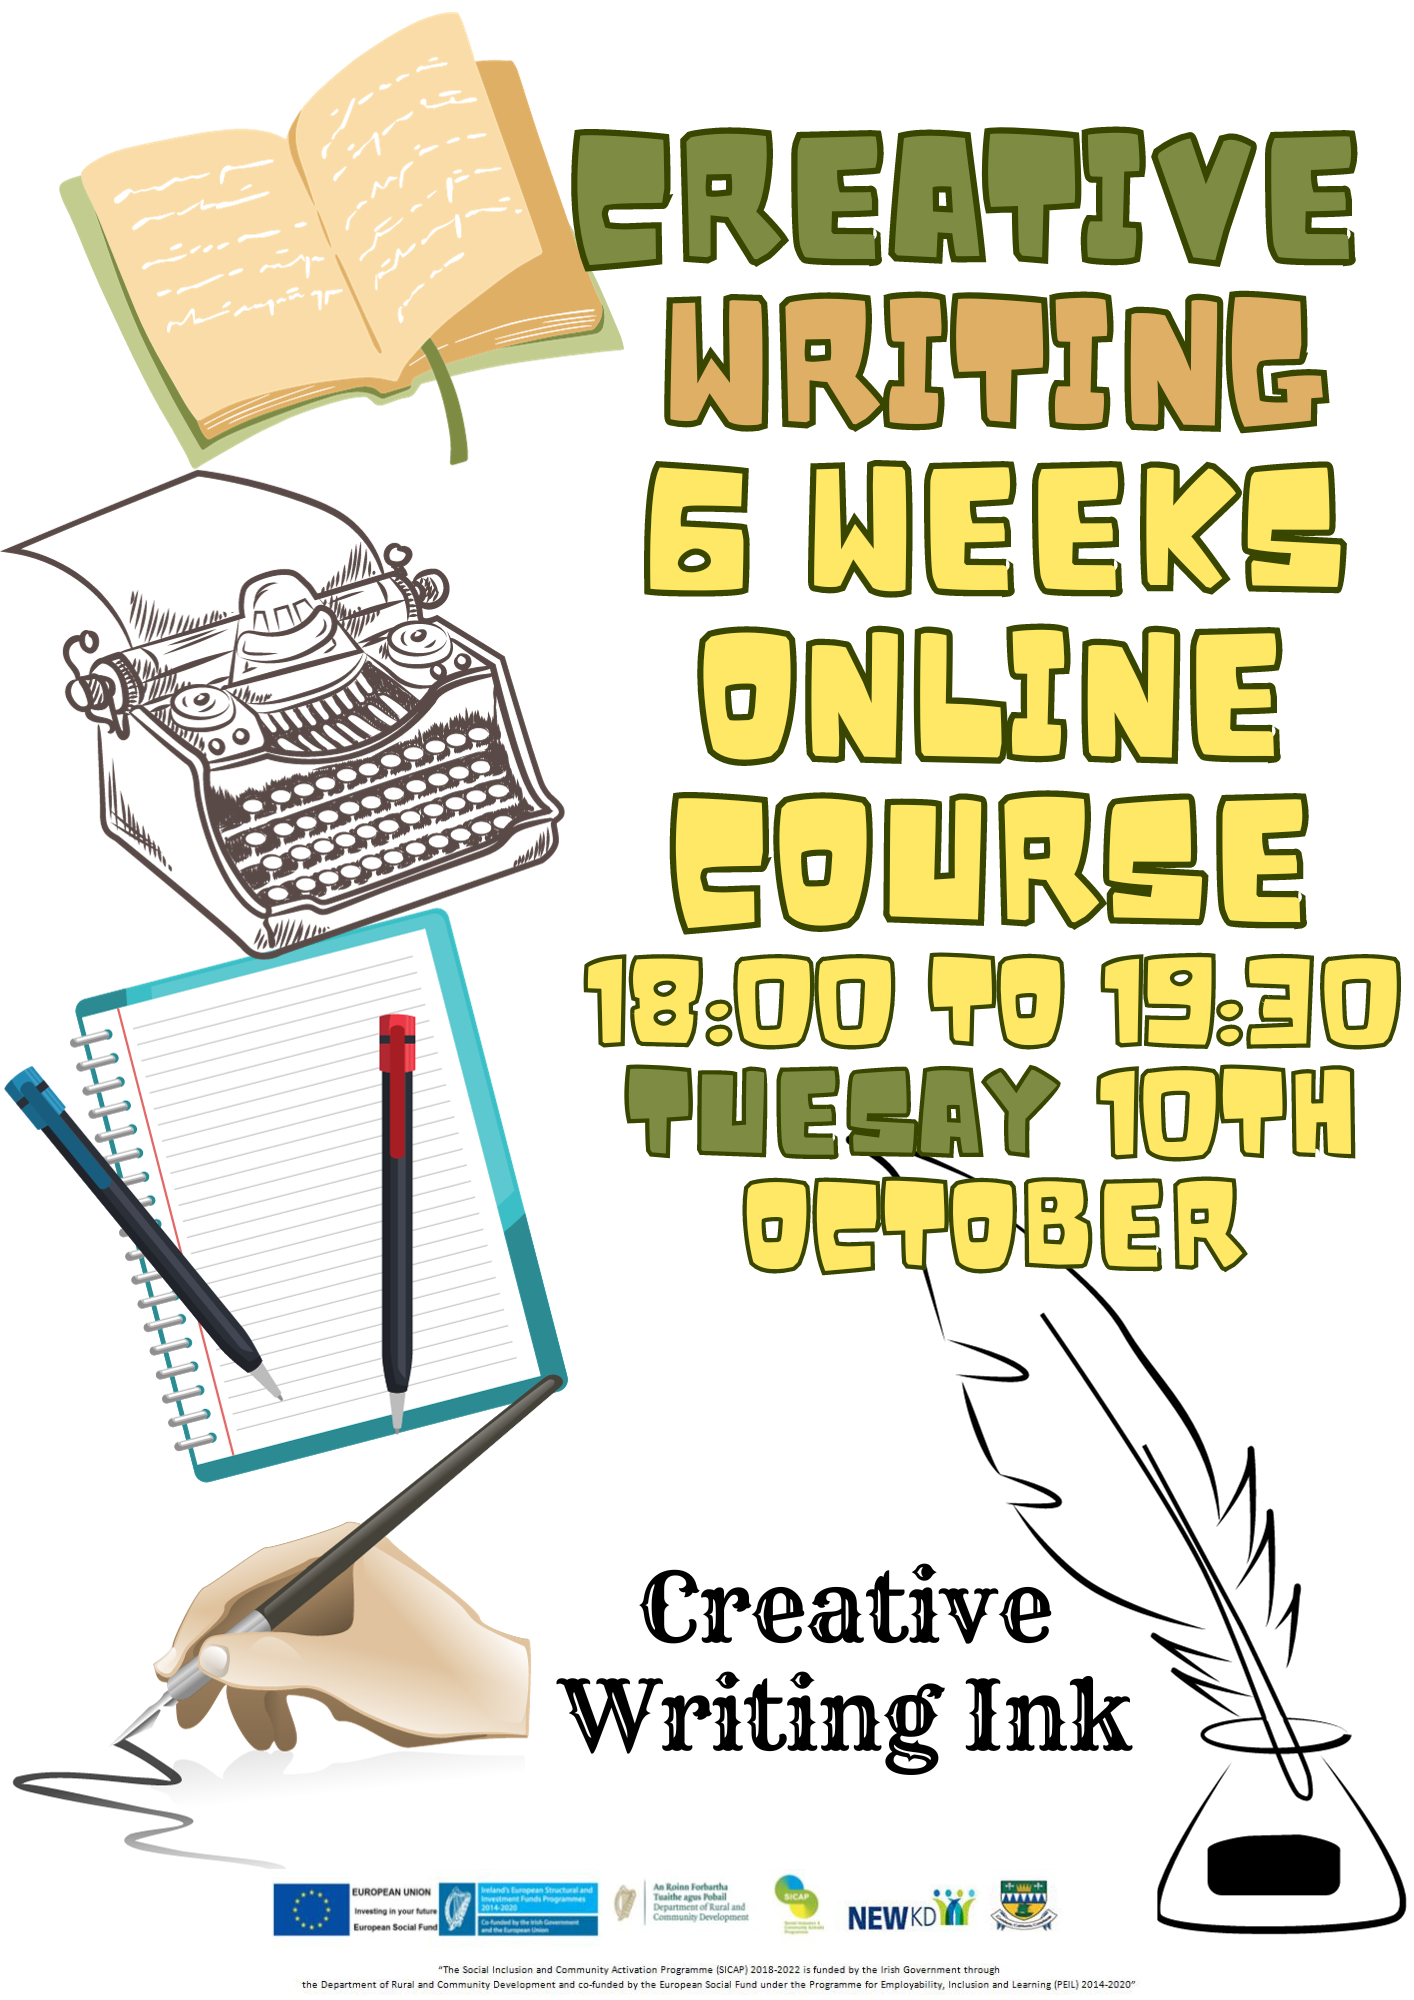 Creative Writing Course event at Kerry Mental Health & Wellbeing Fest 2022